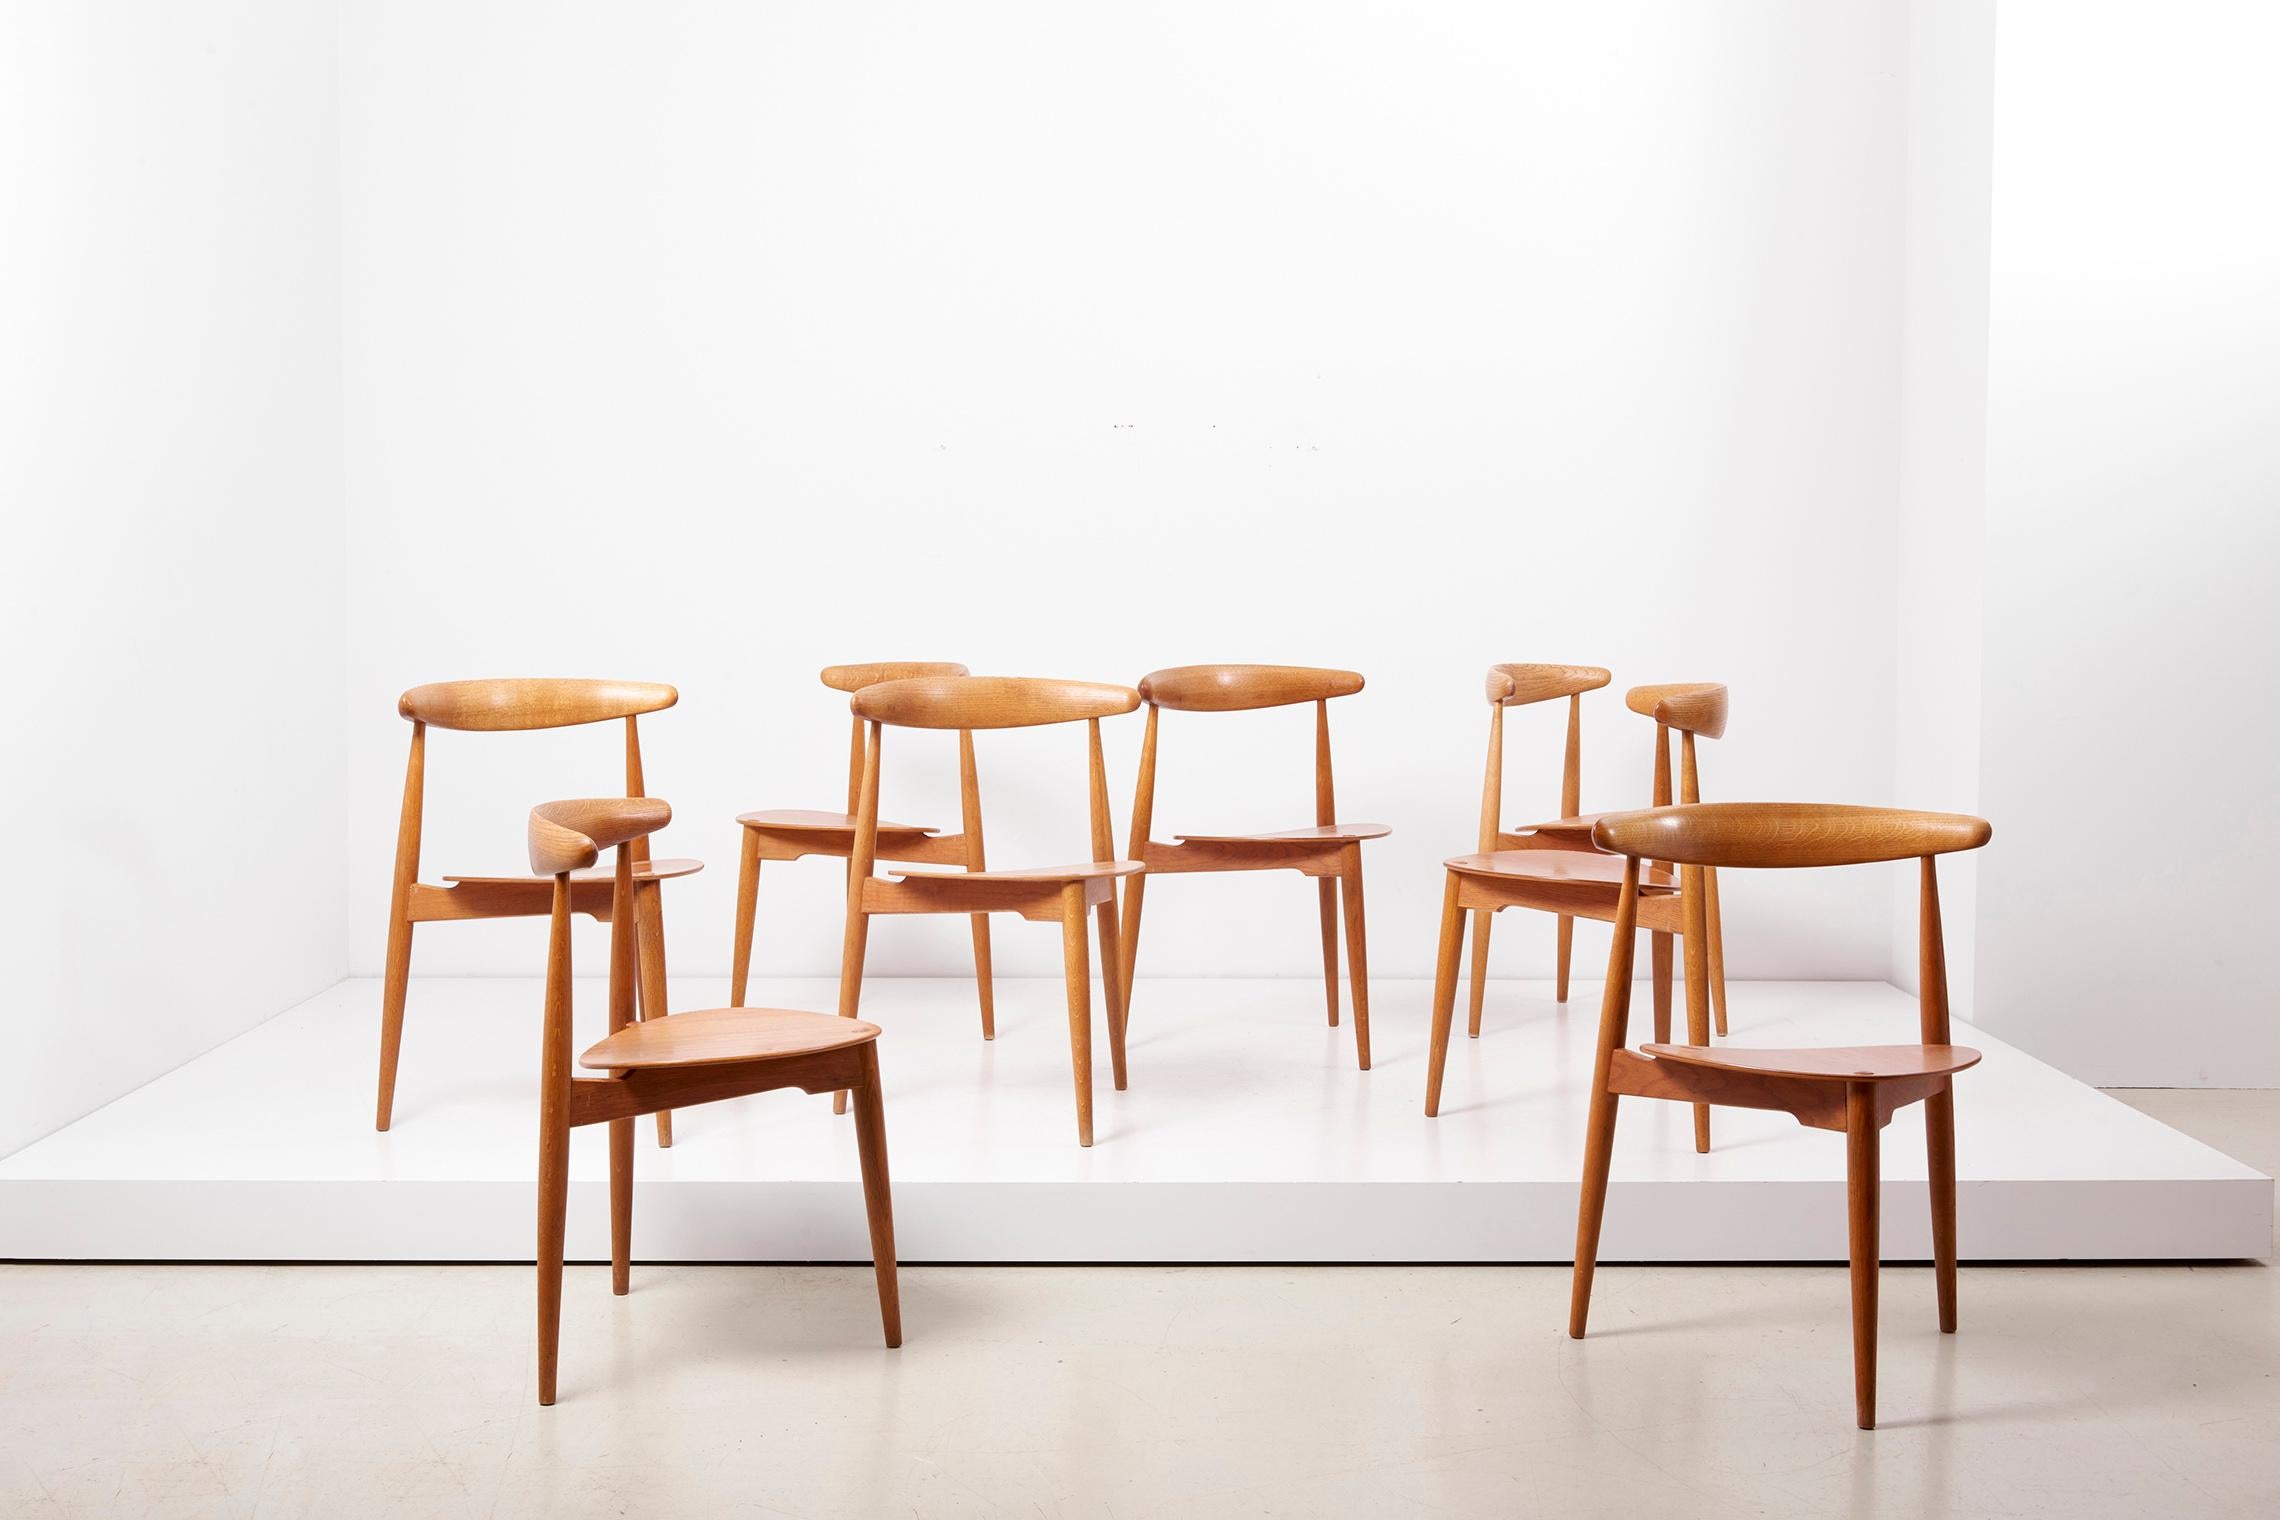 Set of 8 oak and teak heart chairs by Hans Wegner for Fritz Hansen
First owner stackable ‘heart’ tripod chair, model FH 4103, by Hans J. Wegner, designed in 1952 and produced by Fritz Hansen. Teak veneered seat and top rail of oak, natural patina.